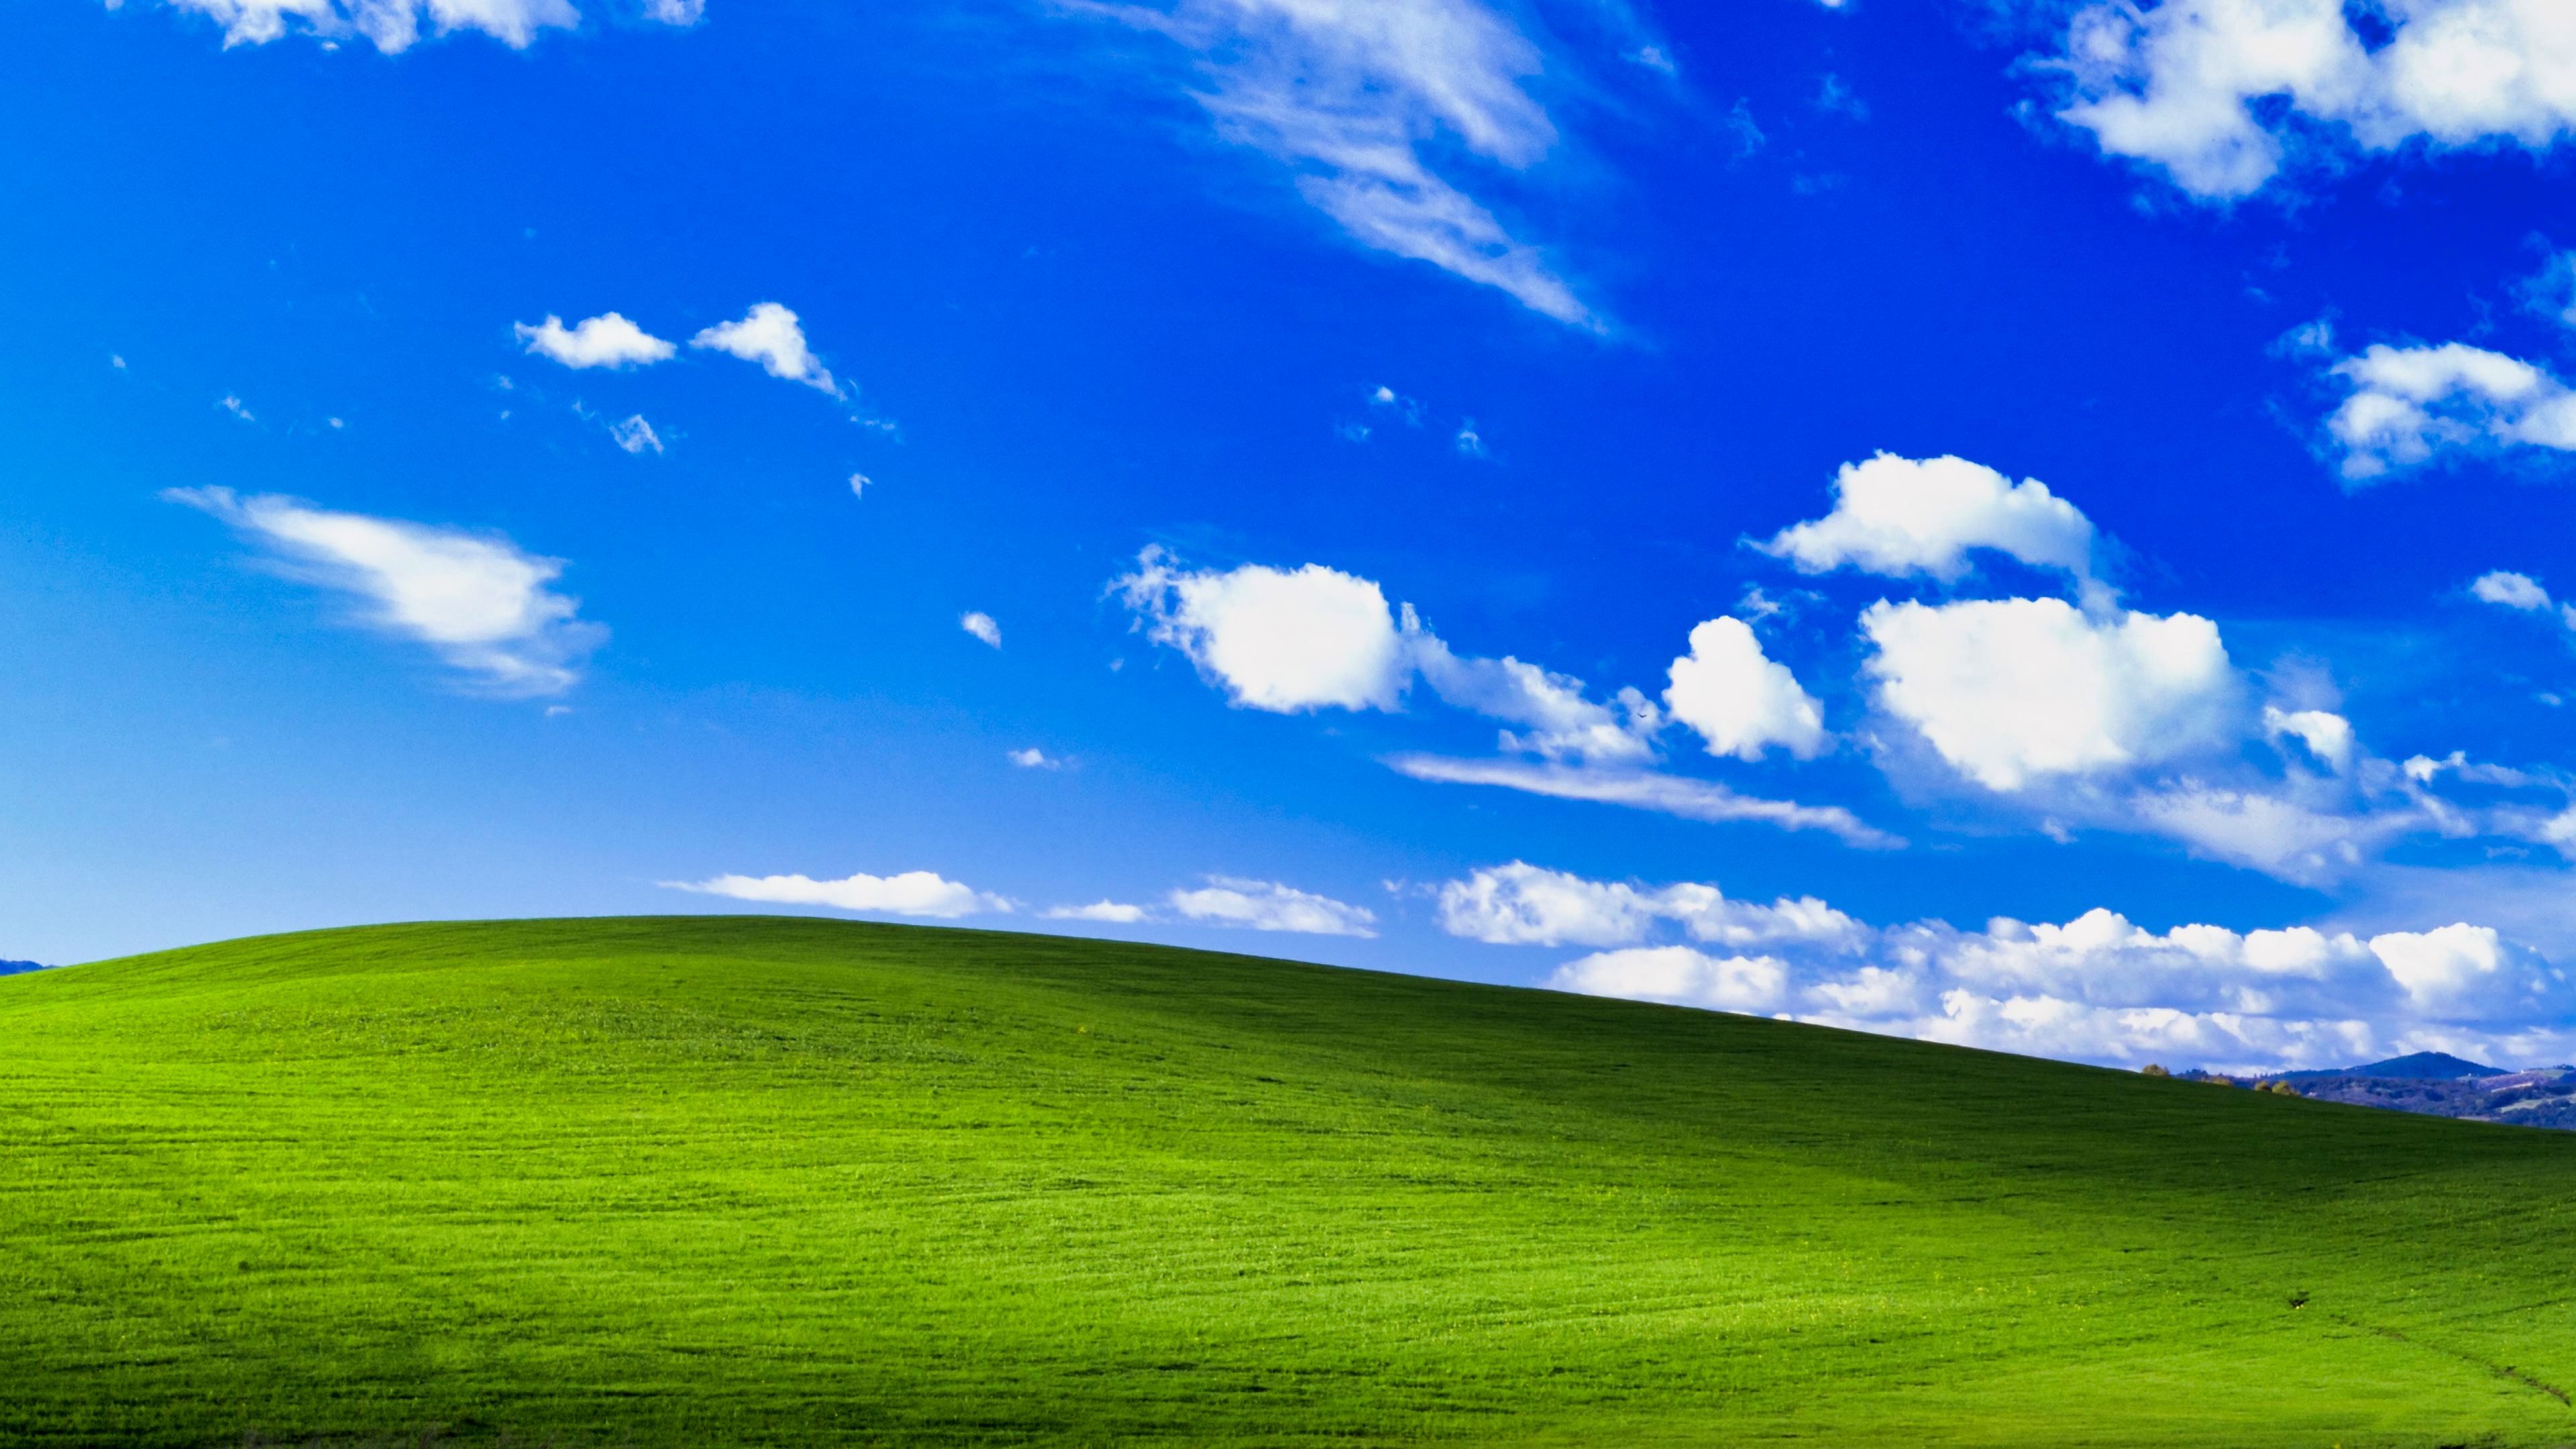 Explore The Old Memories With 900+ Old Desktop Backgrounds For Your 